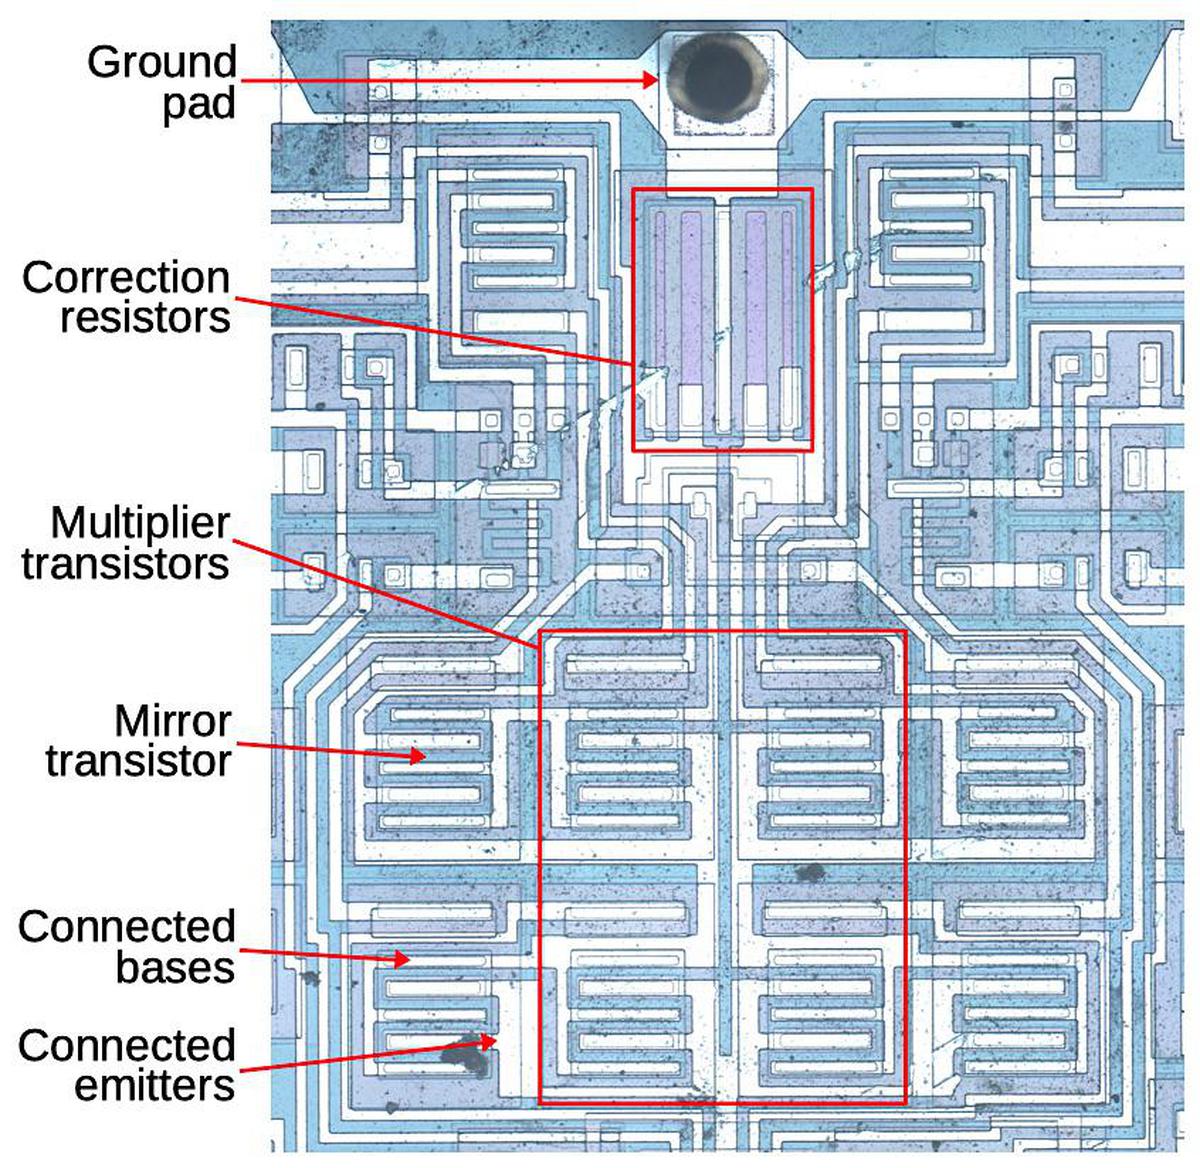 The main multiplier consists of four transistors. Each transistor has a mirror transistor generating the same current, used to correct for emitter resistance.